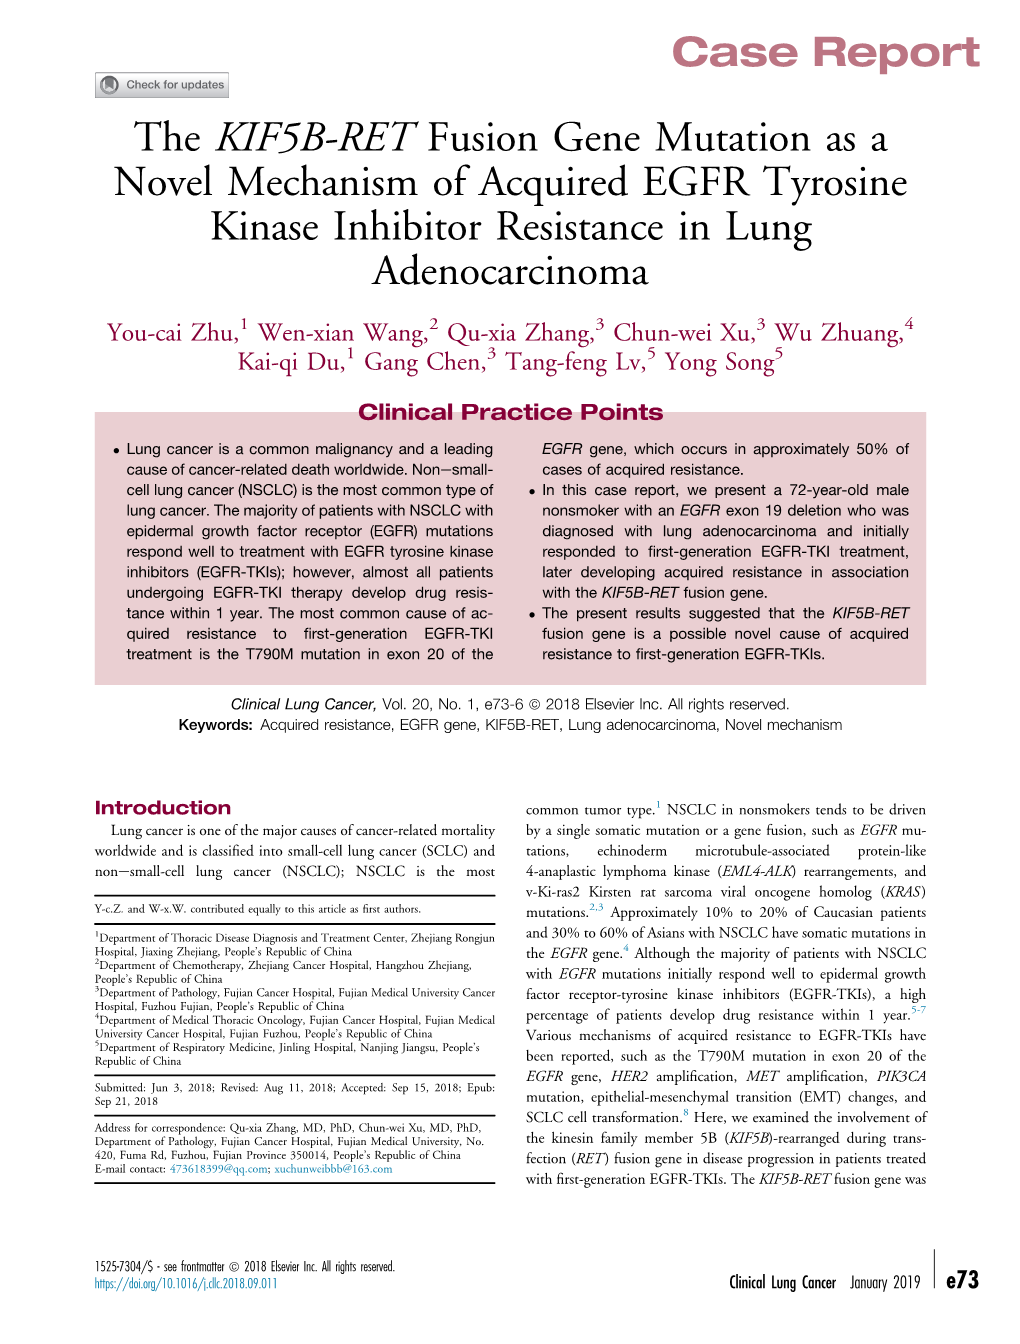 The KIF5B-RET Fusion Gene Mutation As a Novel Mechanism of Acquired EGFR Tyrosine Kinase Inhibitor Resistance in Lung Adenocarcinoma